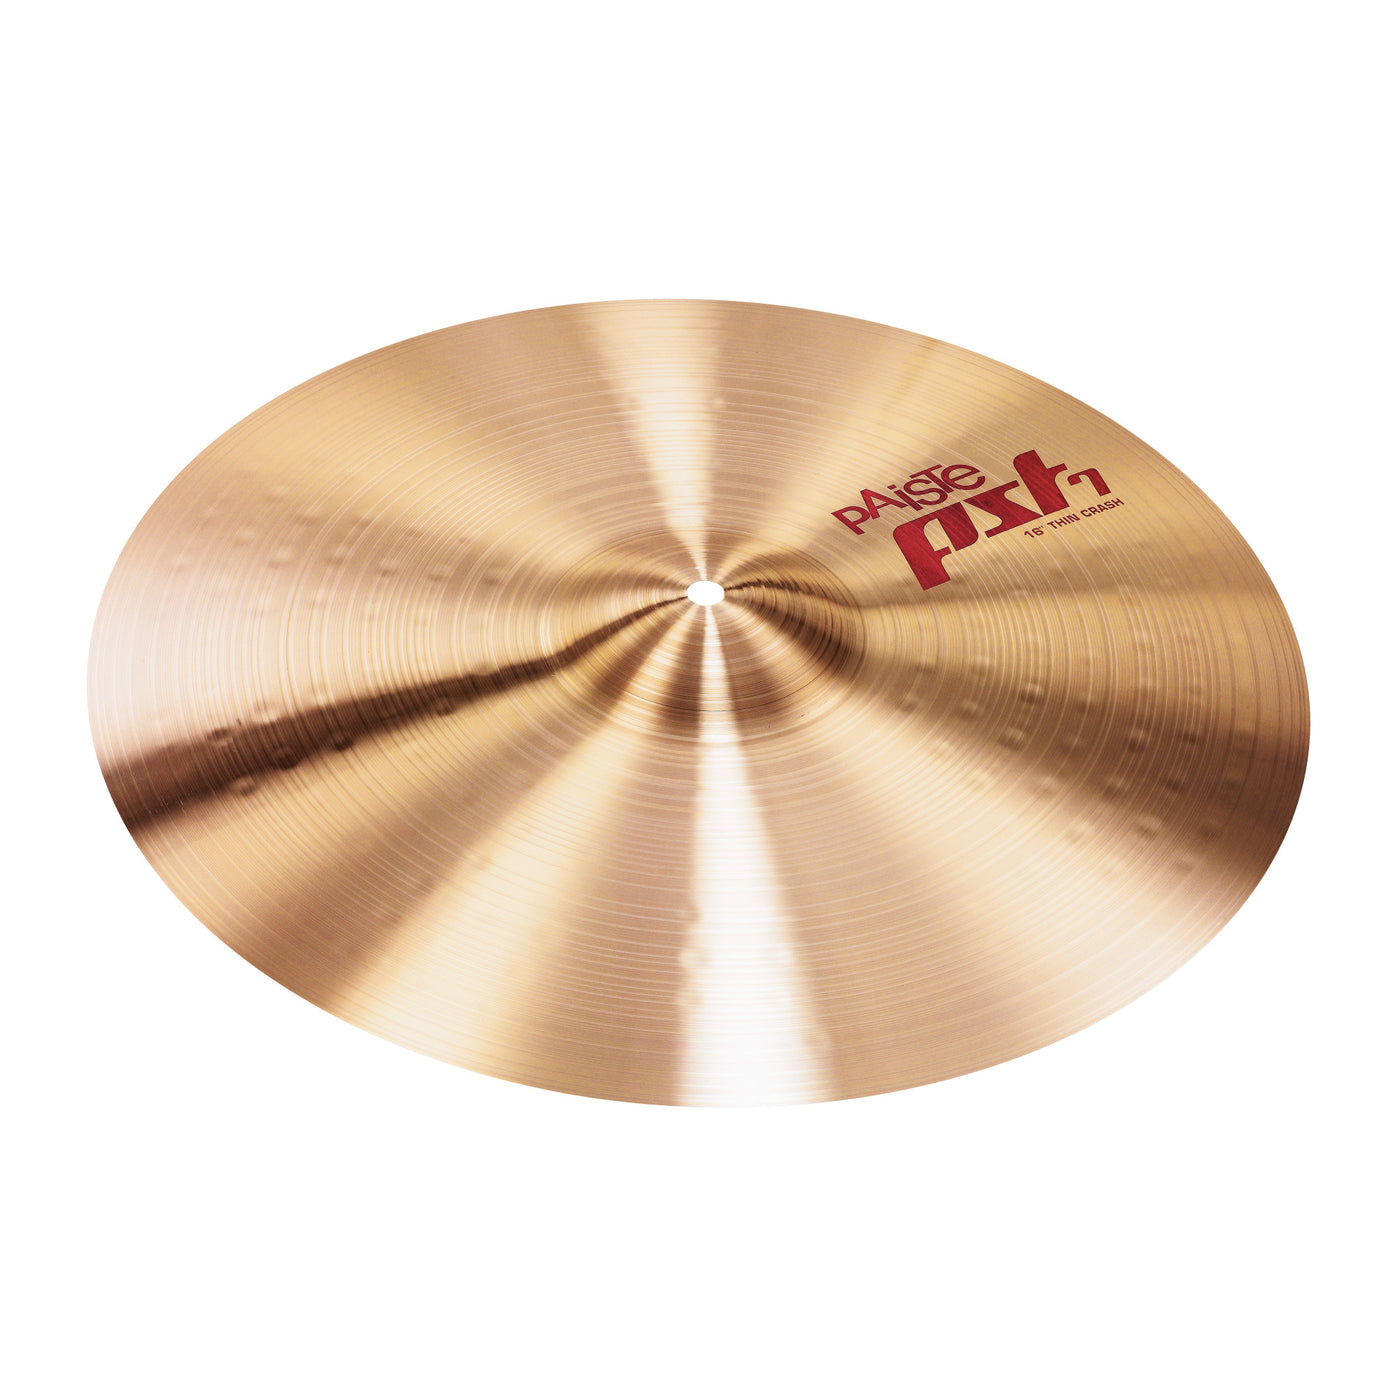 Paiste Thin Crash Cymbal, PST 7 Series, Percussion Instrument for Drums, 16"